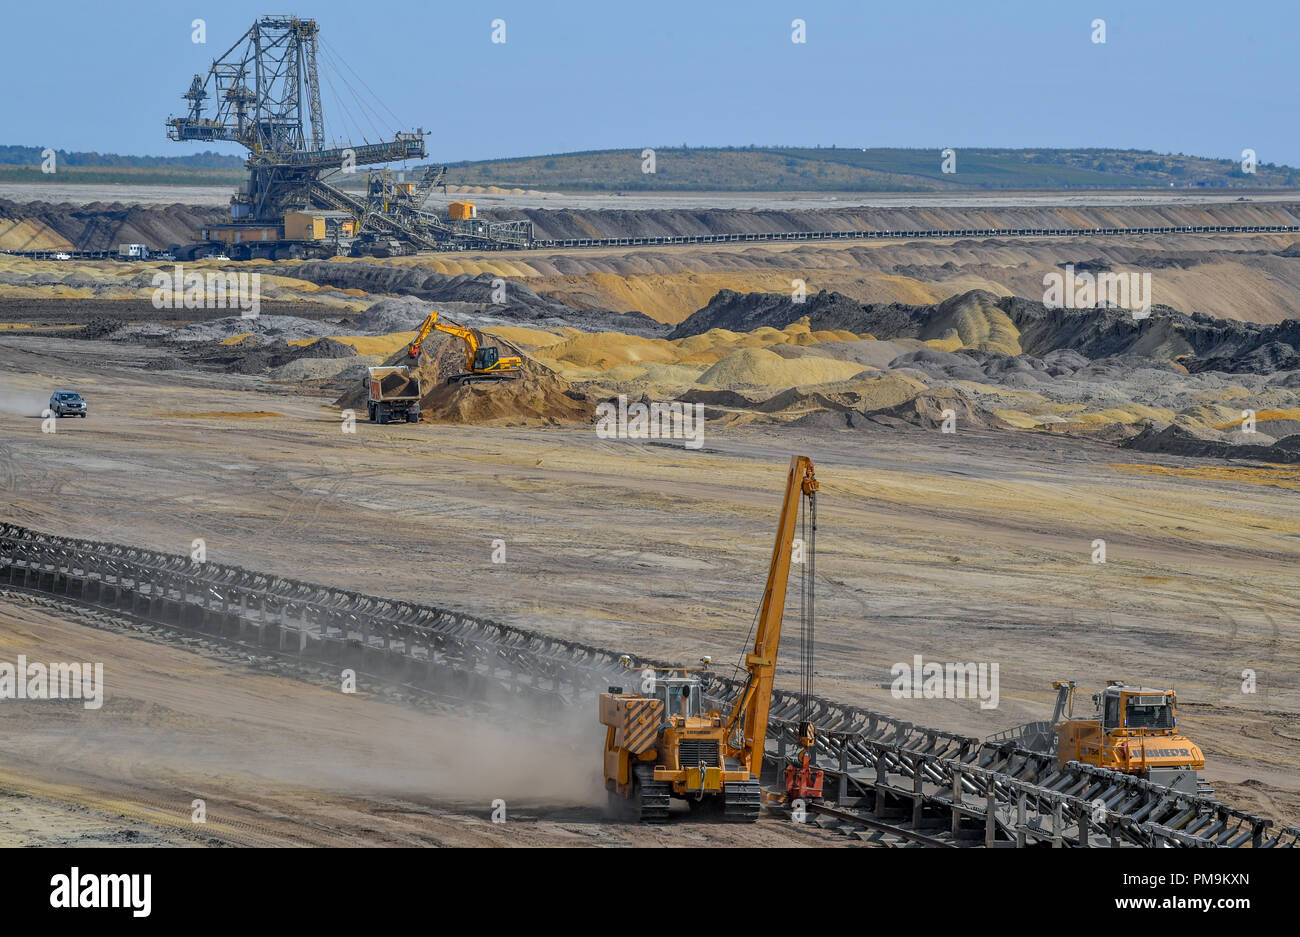 Welzow, Brandenburg. 17th Sep, 2018. View into the opencast lignite mine Welzow Süd of LEAG (Lausitz Energie Bergbau AG) on overburden dumps. The village of Proschim, only a few kilometres away, is to be dredged for the Welzow South opencast lignite mine. Residents and environmental associations have been defending themselves against this for many years. Credit: Patrick Pleul/dpa-Zentralbild/ZB/dpa/Alamy Live News Stock Photo